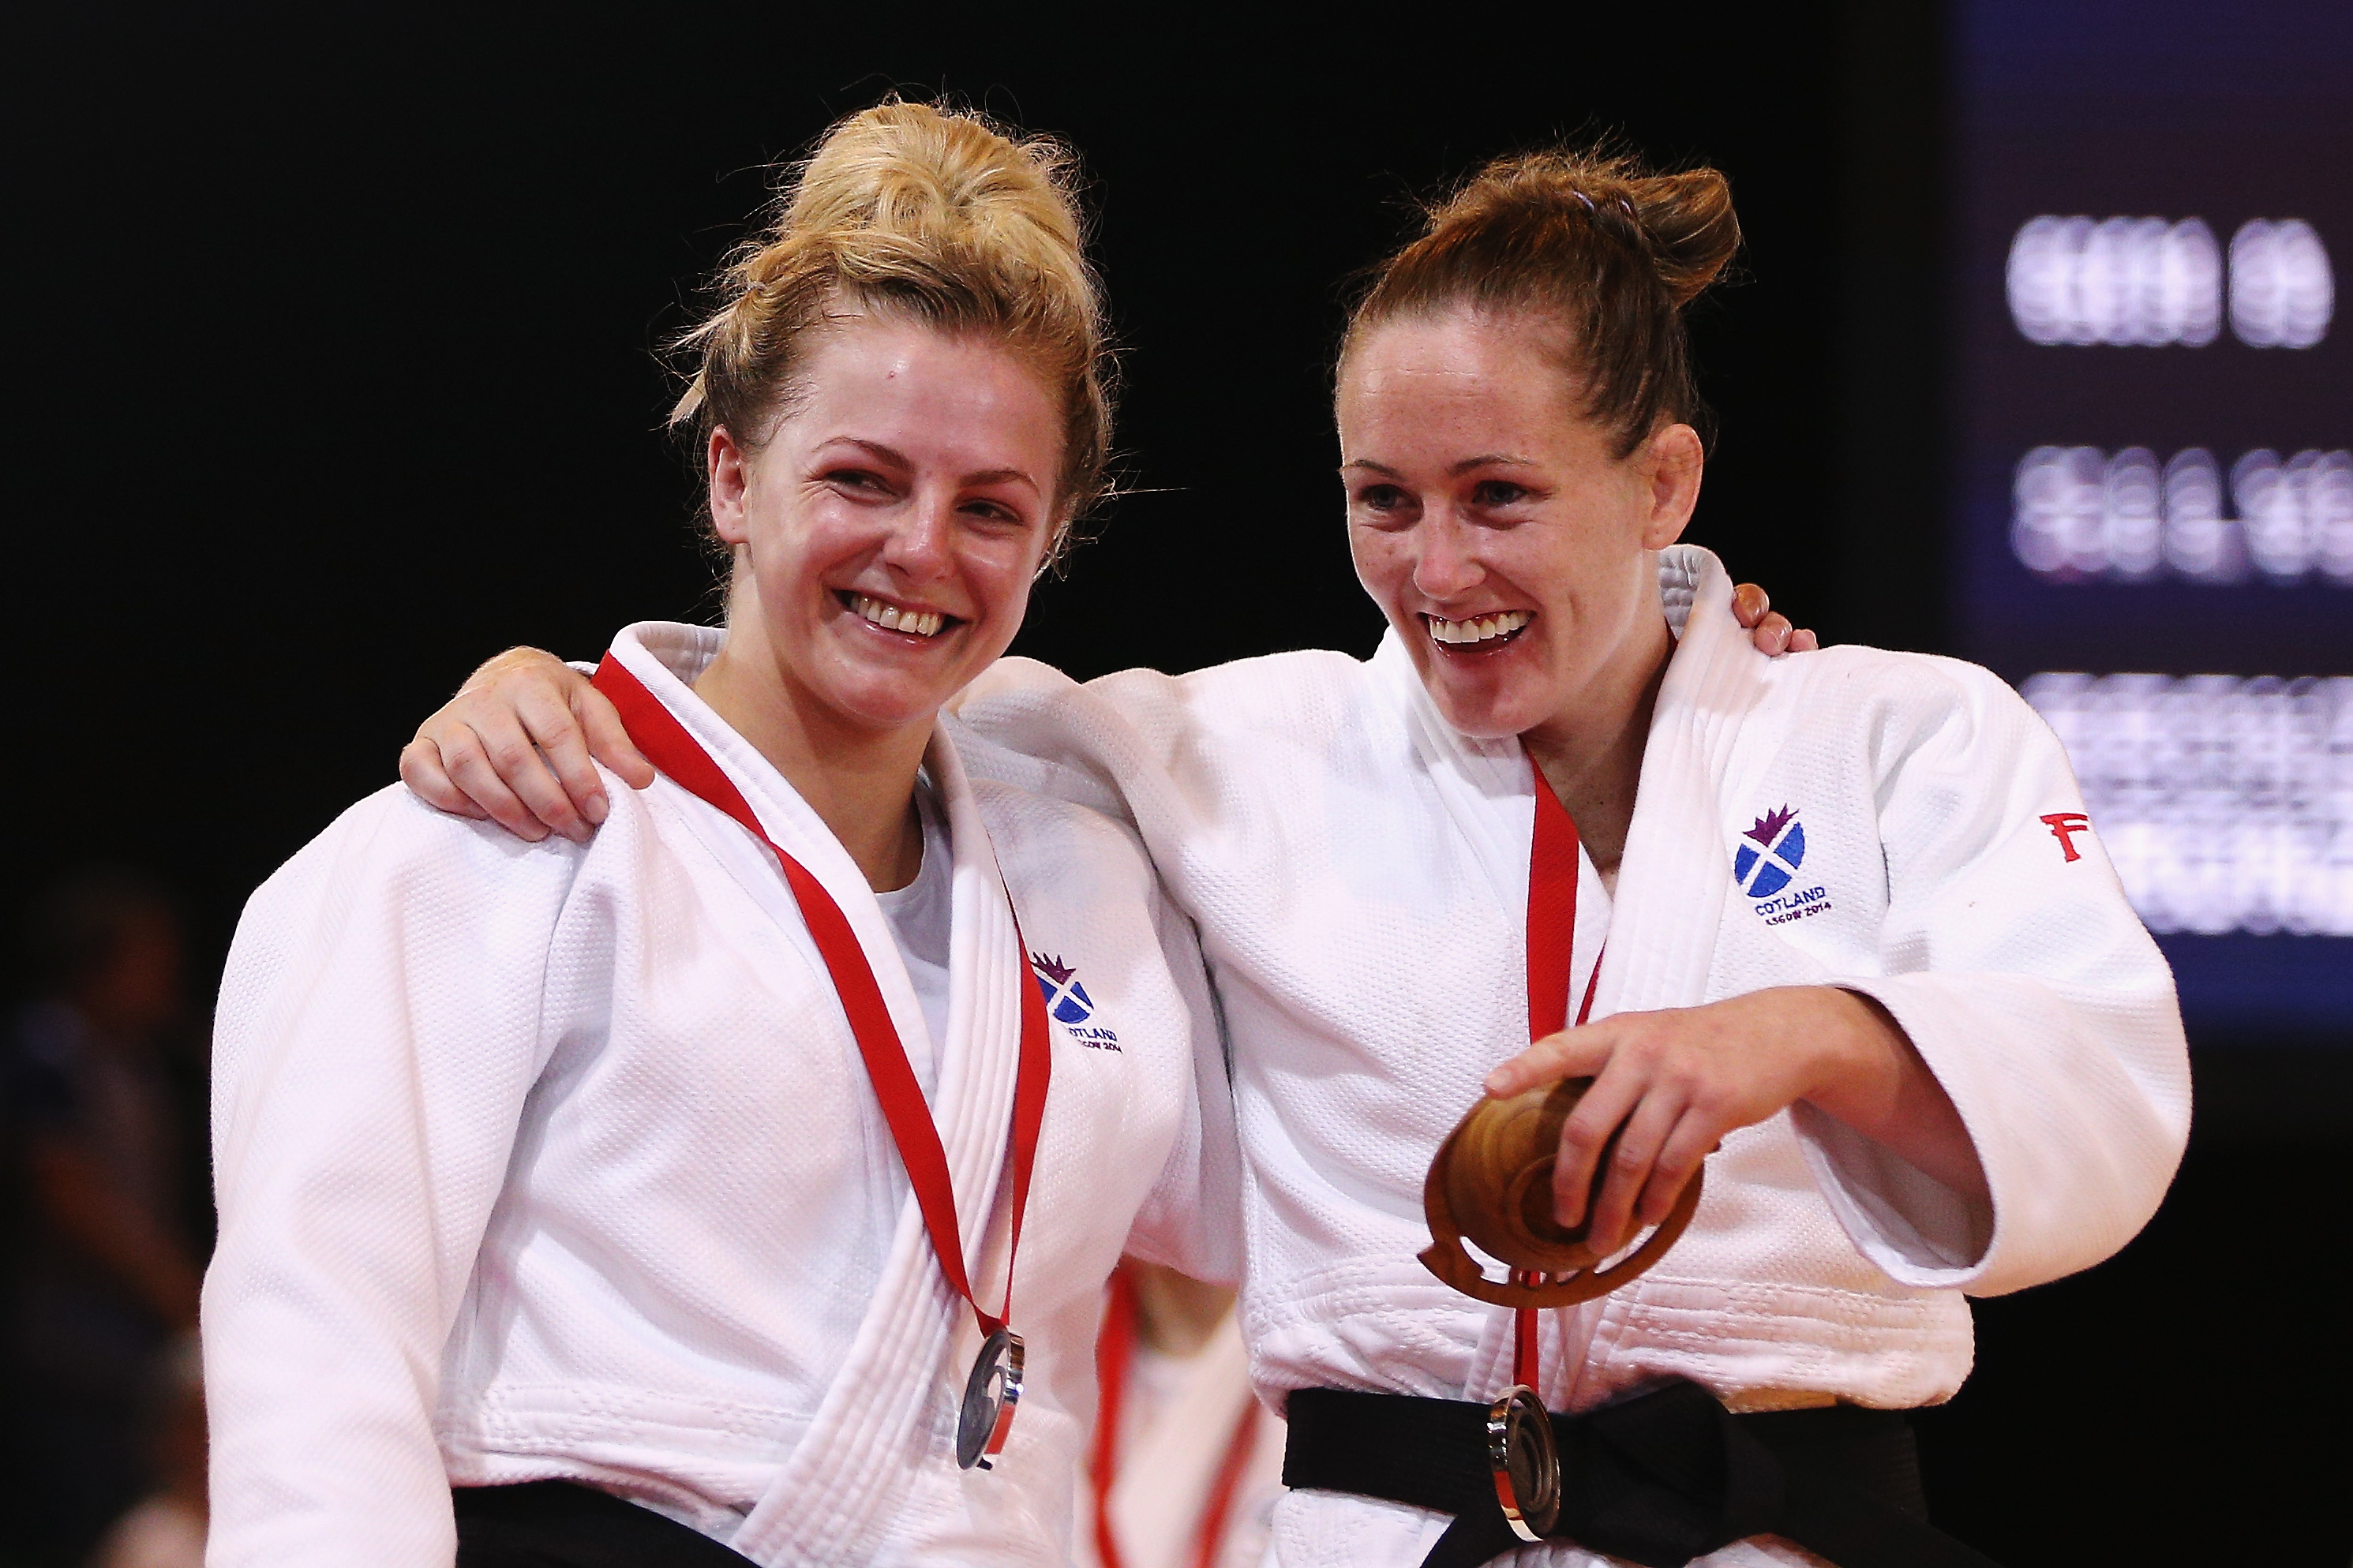 Stephanie Inglis and Connie Ramsay of Scotland pose with their medals on day one of the Glasgow 2014 Commonwealth Games.